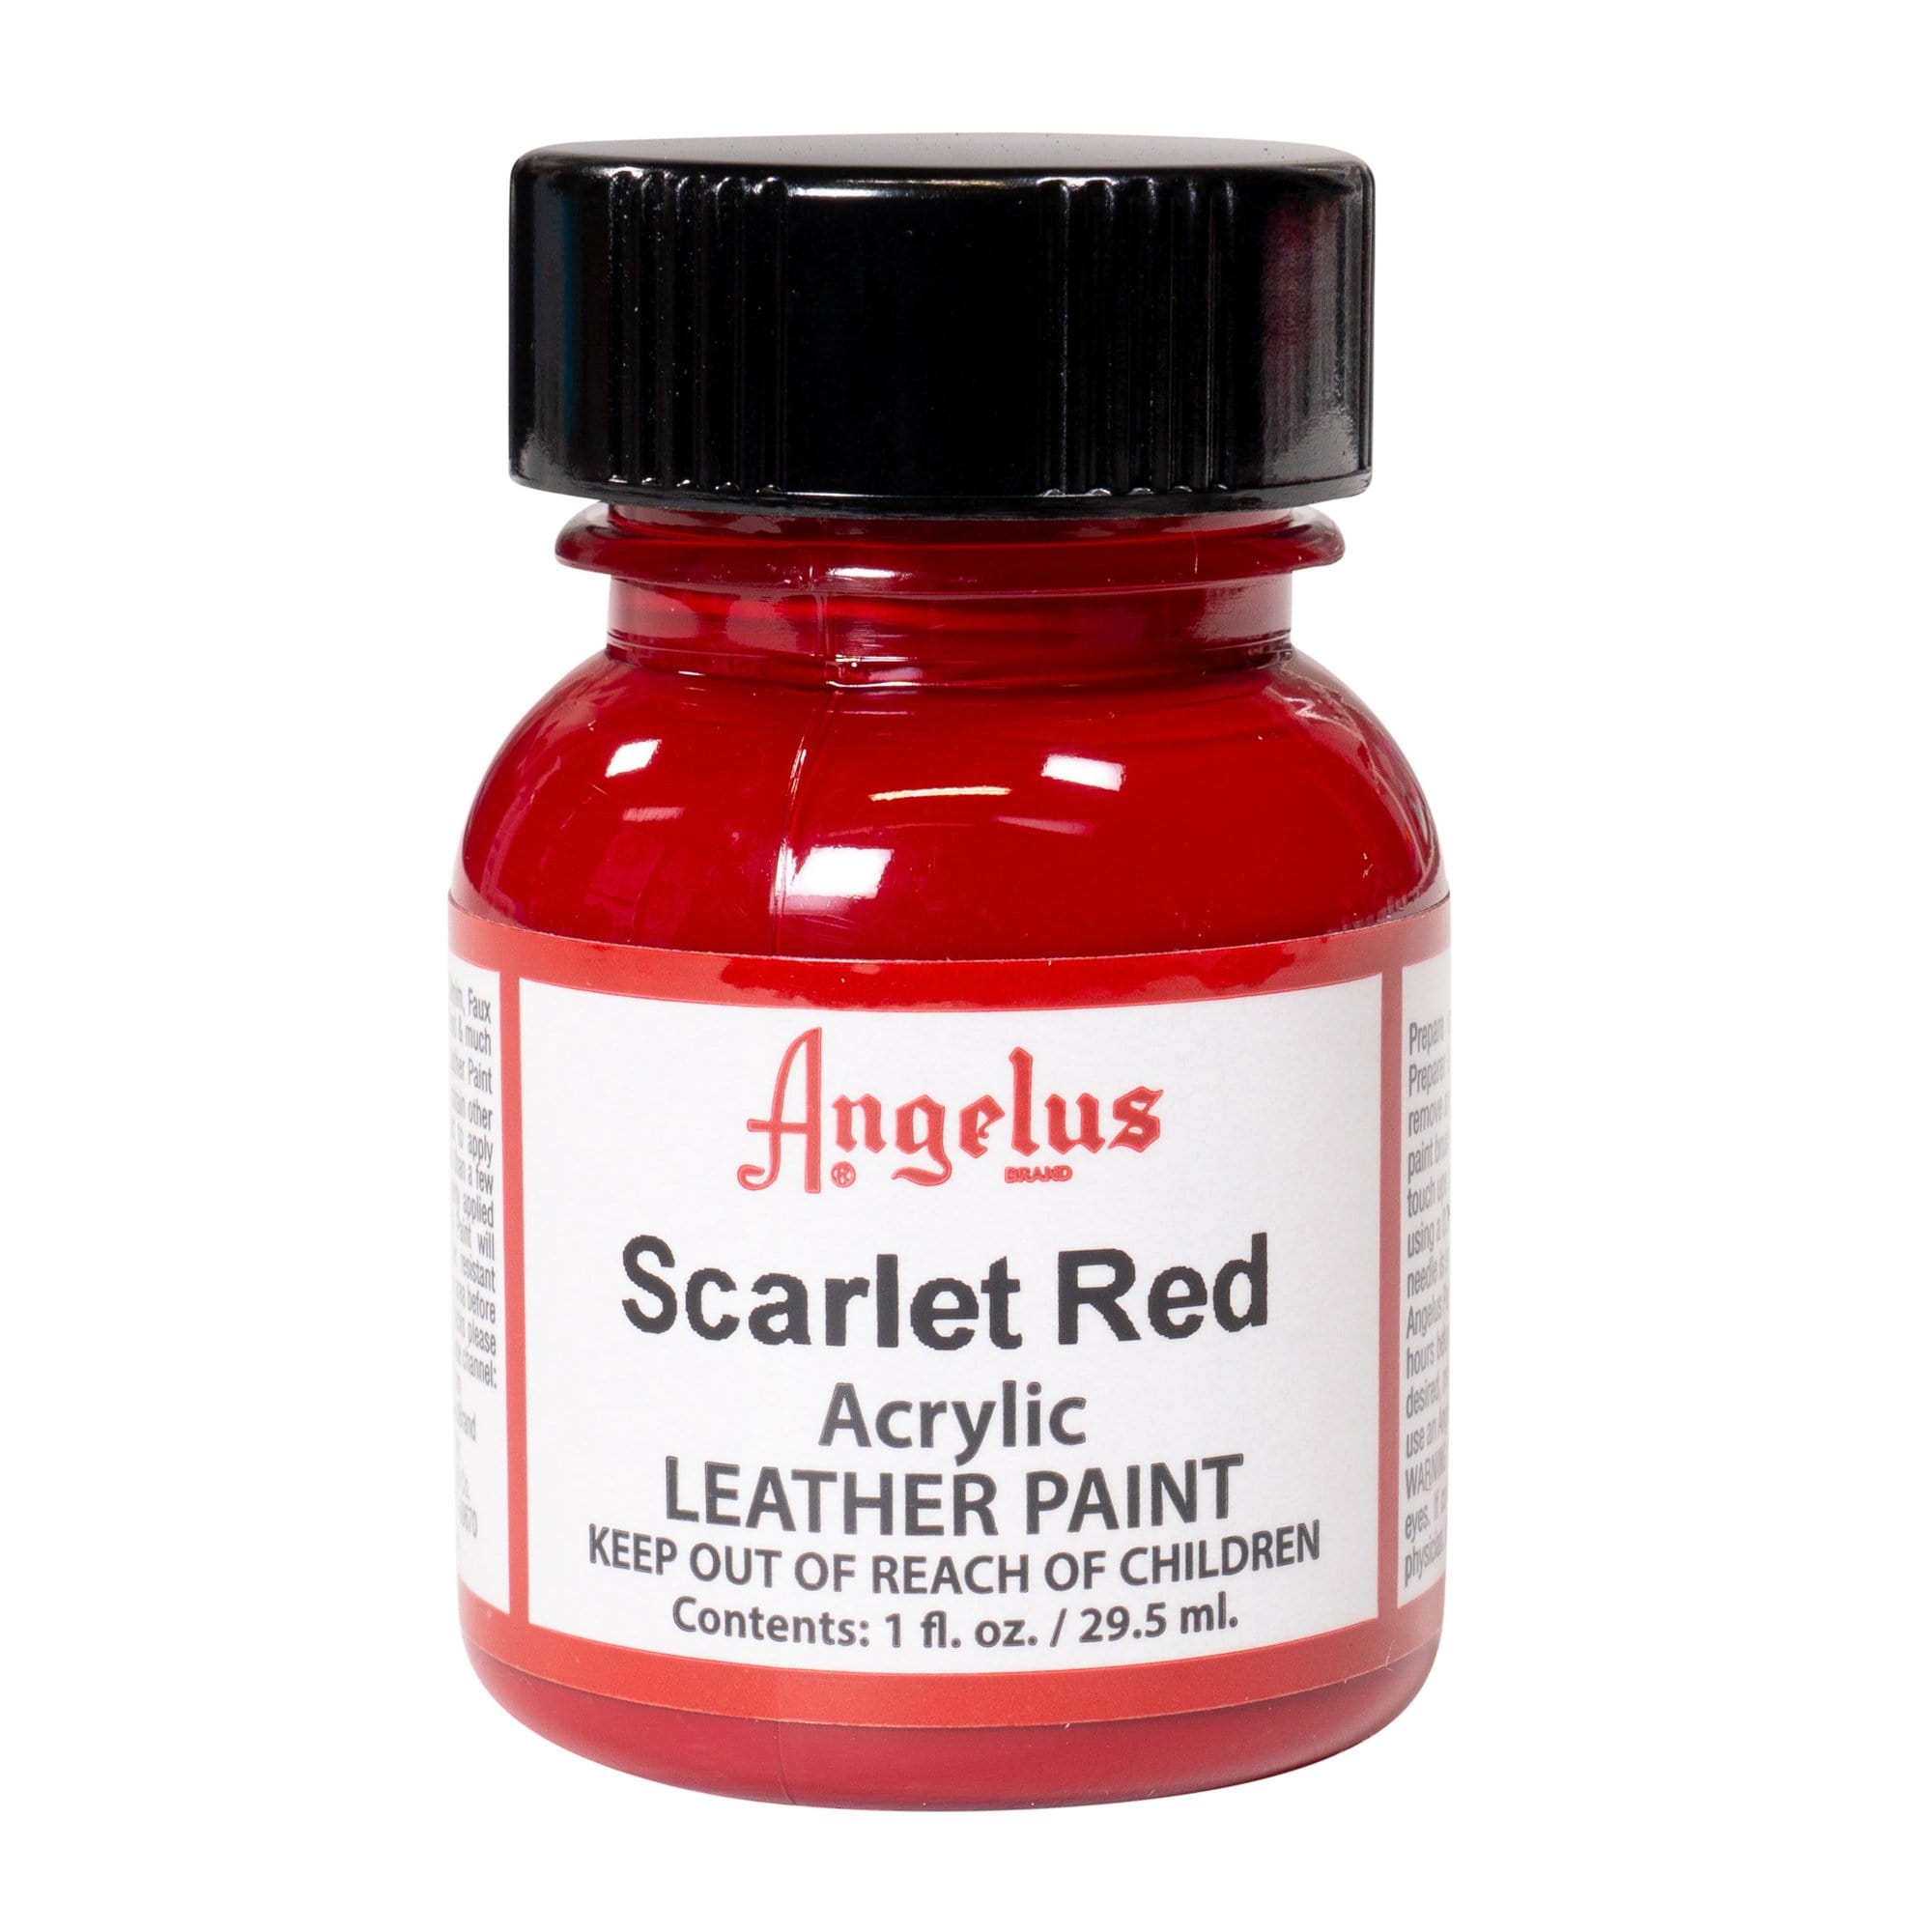 Angelus Acrylic Leather Paint Scarlet Red 1oz